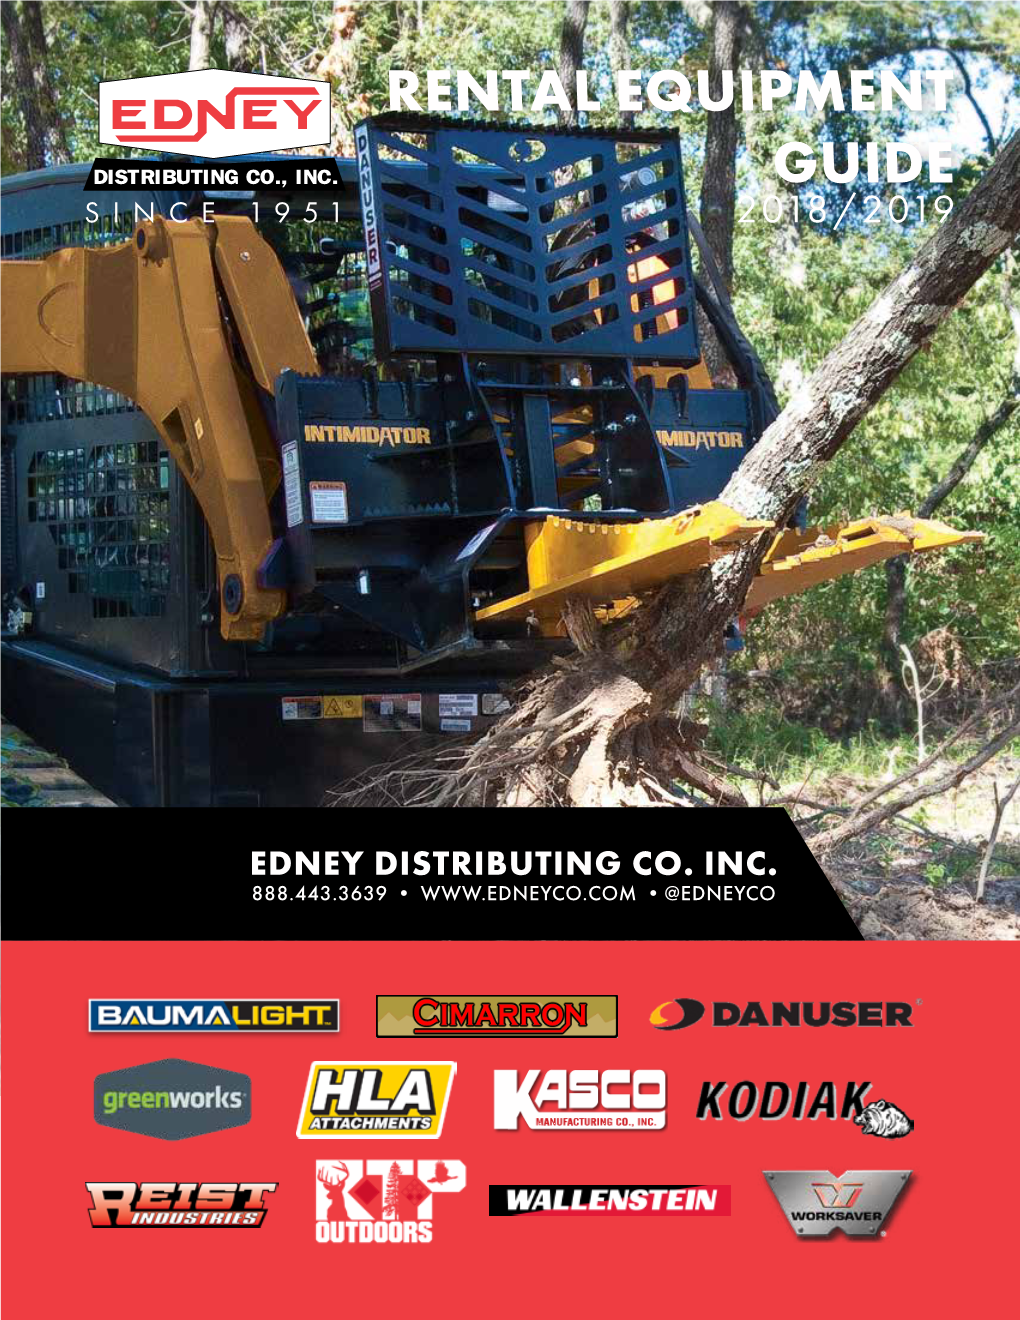 Rental Equipment Guide Since 1951 2018/2019